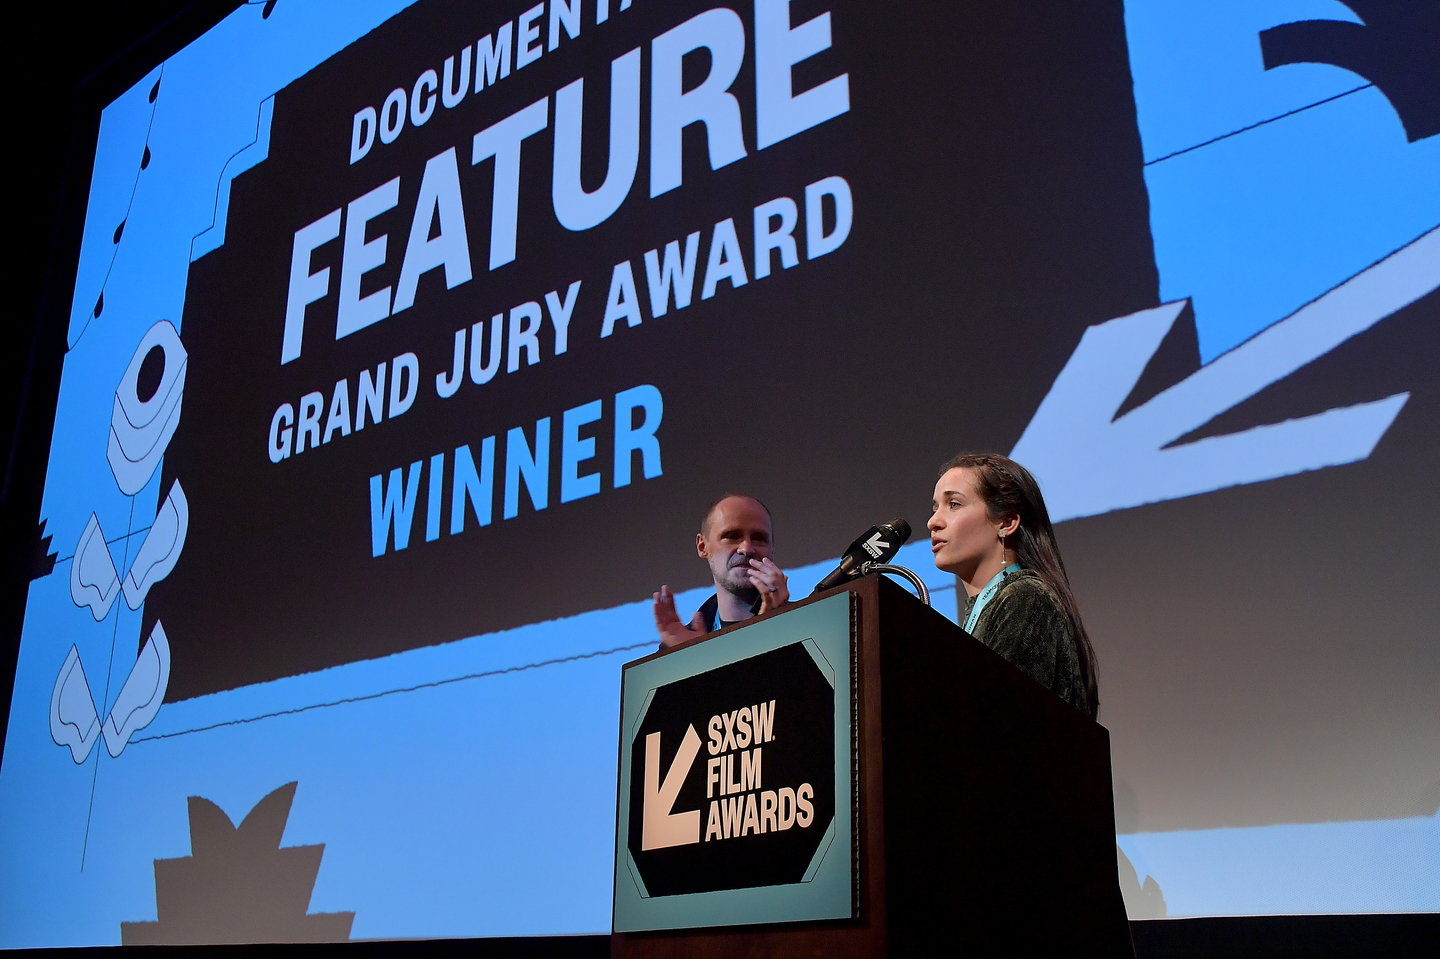 Edward Watts and Waad al-Kateab accept the Documentary Feature Grand Jury Award for their film For Sama at the SXSW Film Awards at the Paramount Theatre.